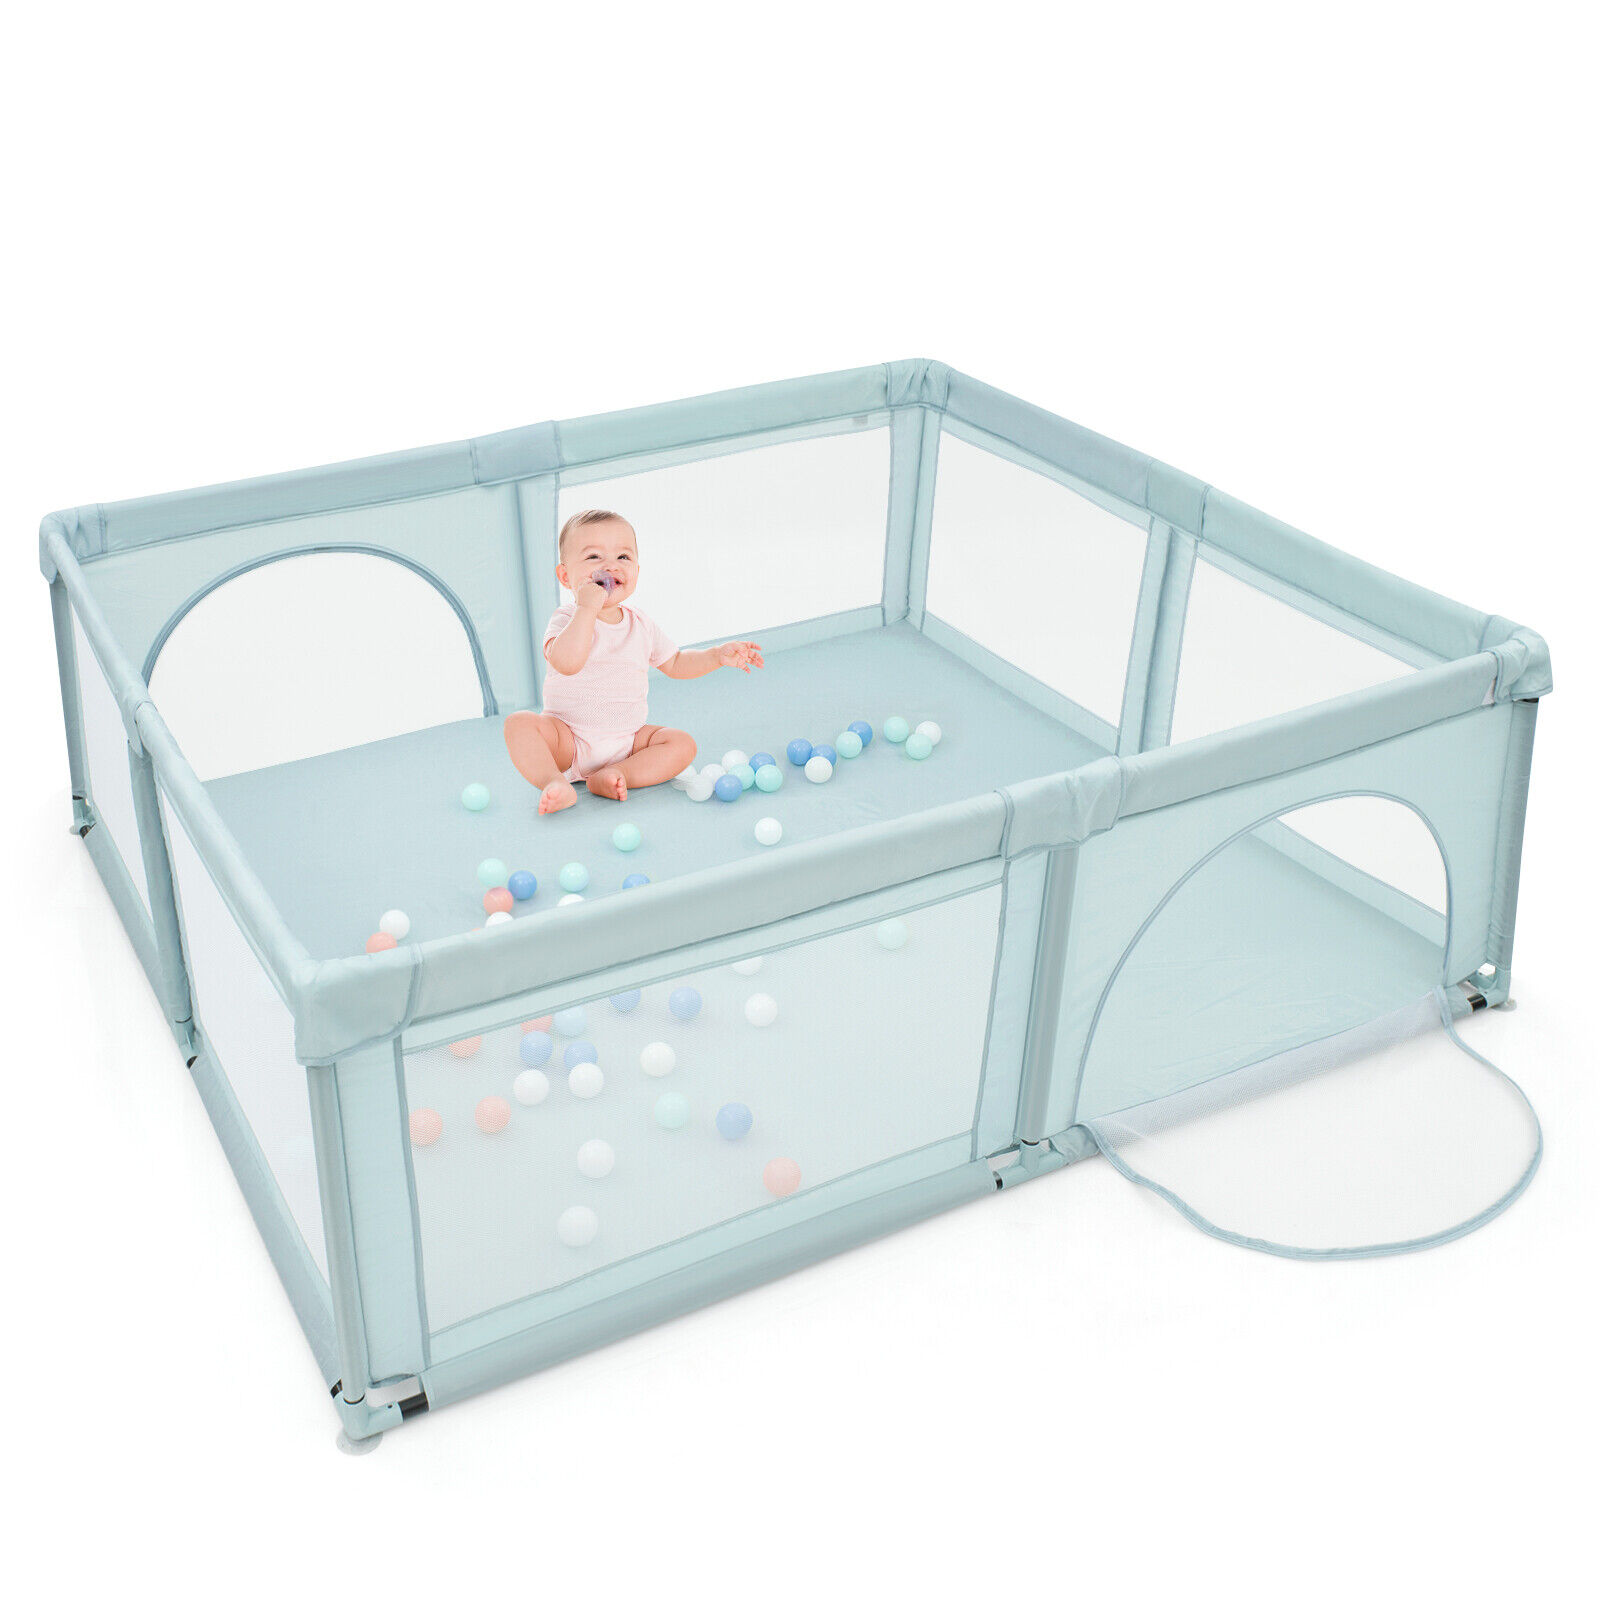 Great Choice Products Baby Playpen Infant Large Safety Playing Center Yard W/50 Balls Blue